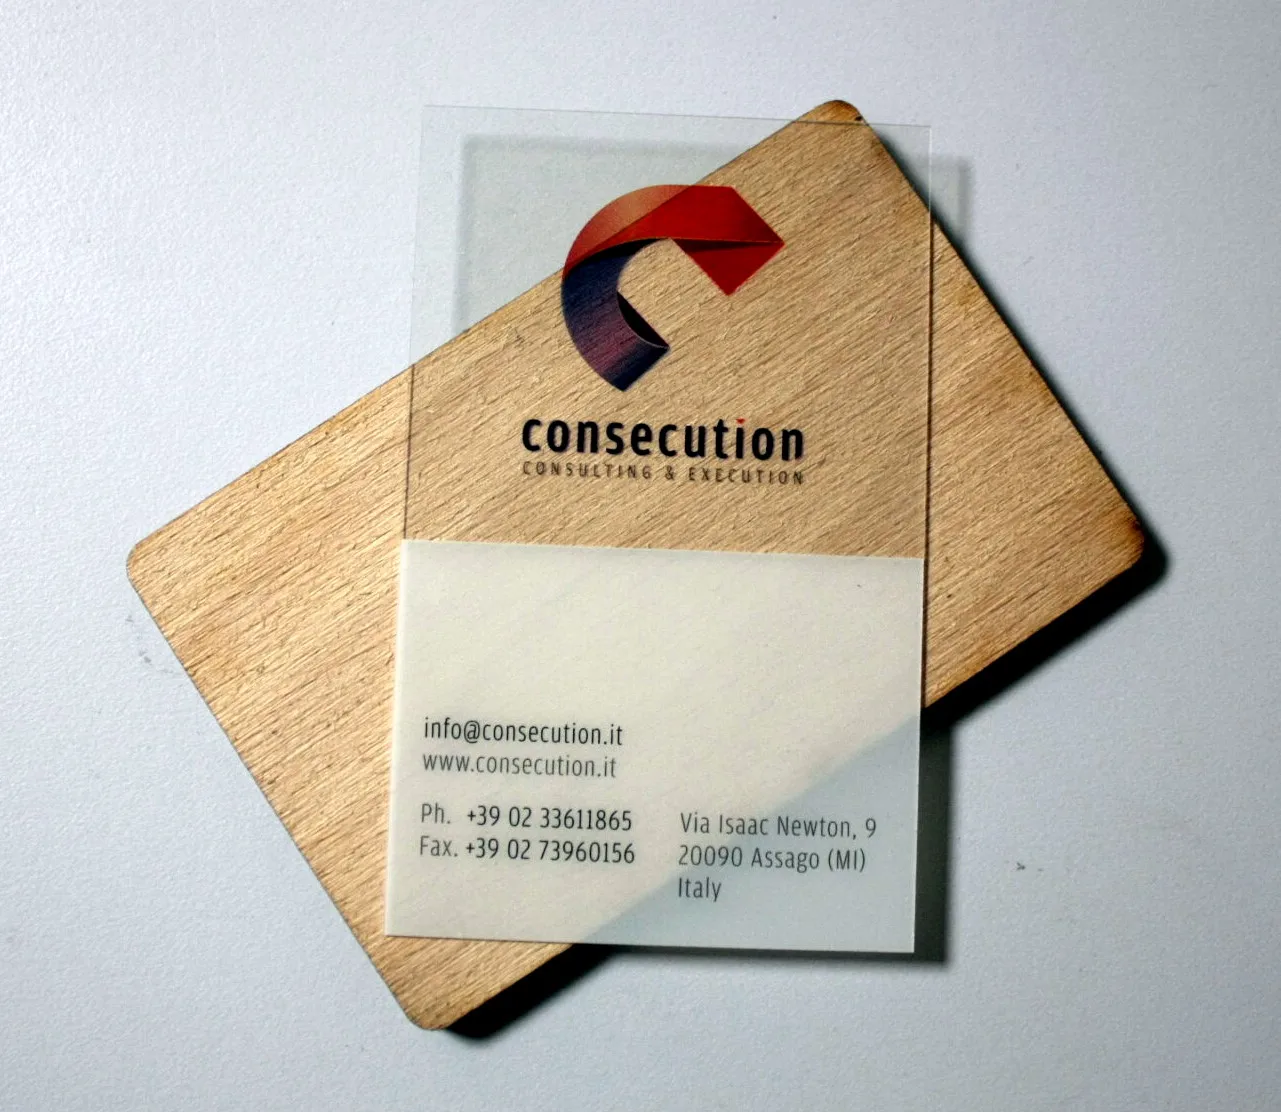 (500pcs/lot)VIP cards with clear PVC material,VIP business cards,VIP transparent business cards